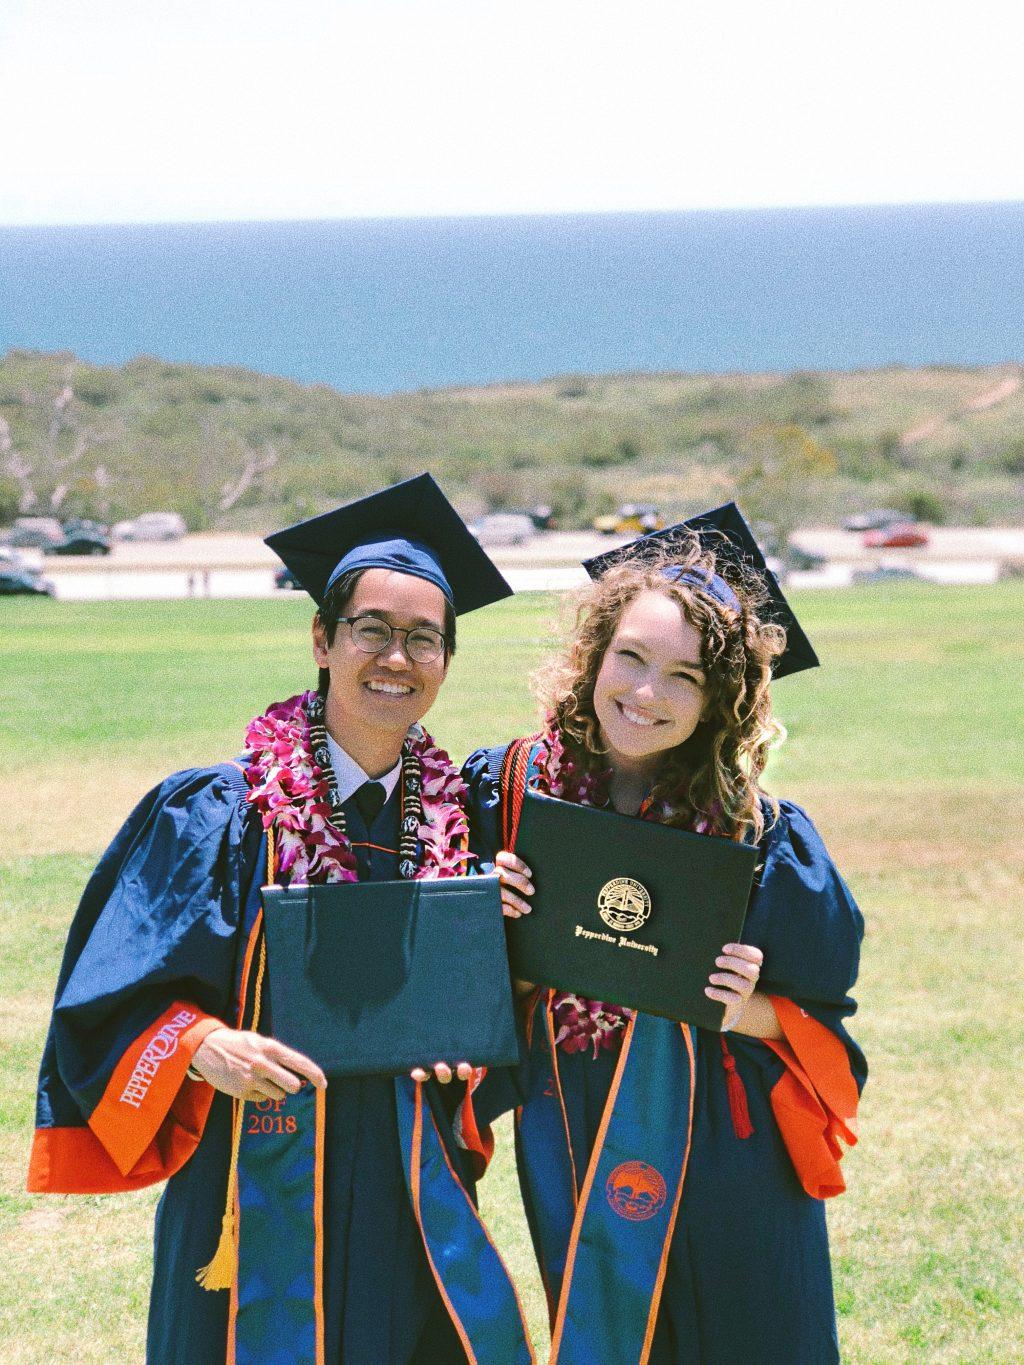 Alumni Justin Lew and Elizabeth Hanley hold their diplomas in front of the Pacific Ocean after graduating from Pepperdine in April 2018. The pair originally started out as friends, but now they have been dating for three years. Photo courtesy of Elizabeth Hanley